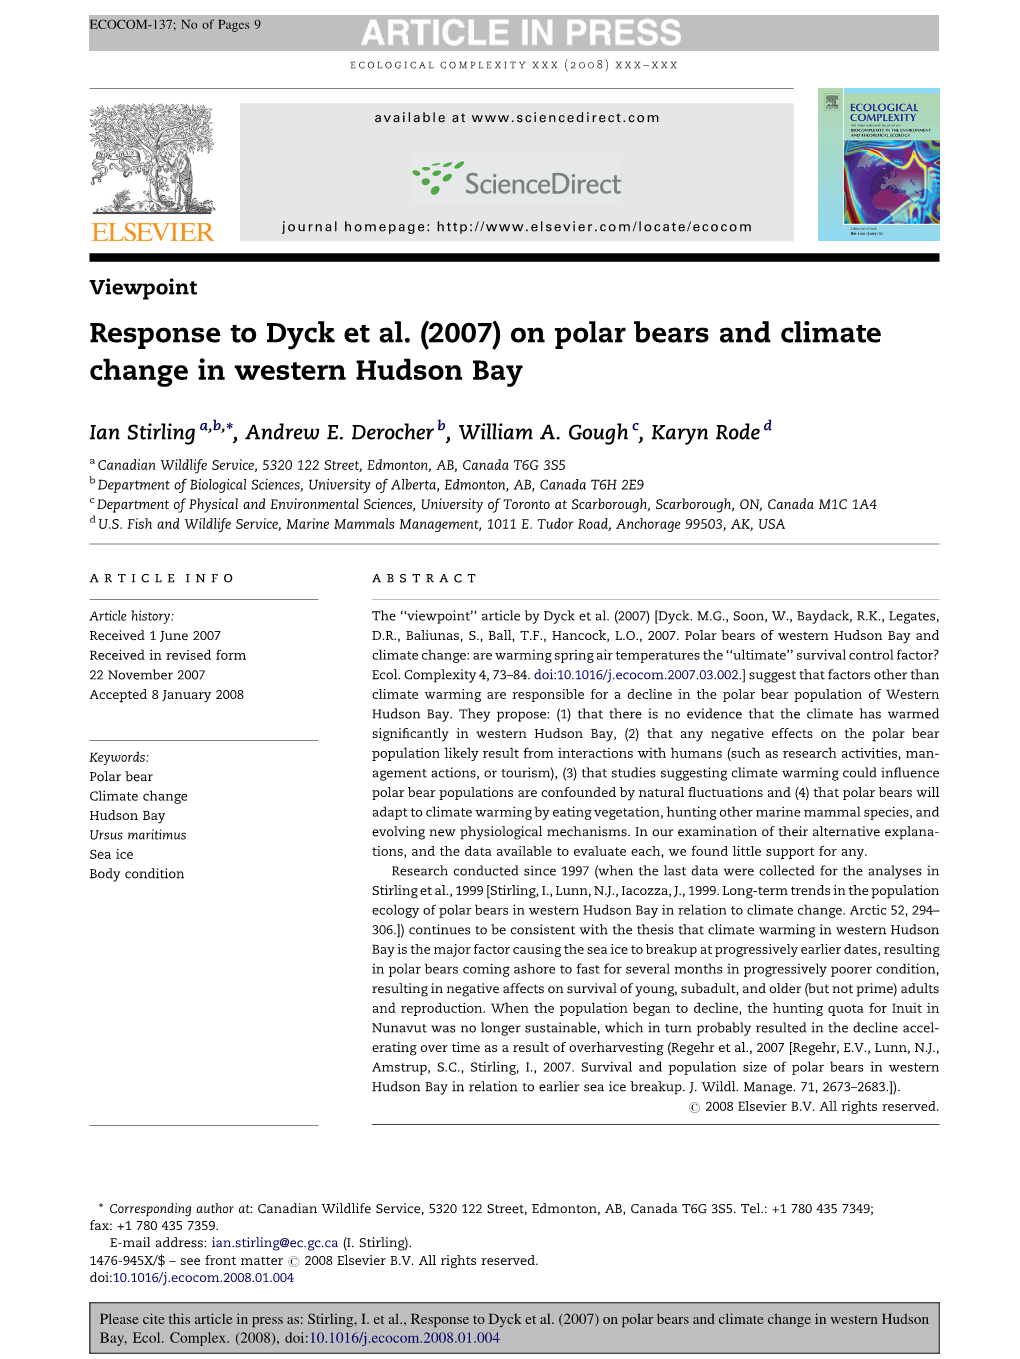 Response to Dyck Et Al. (2007) on Polar Bears and Climate Change in Western Hudson Bay